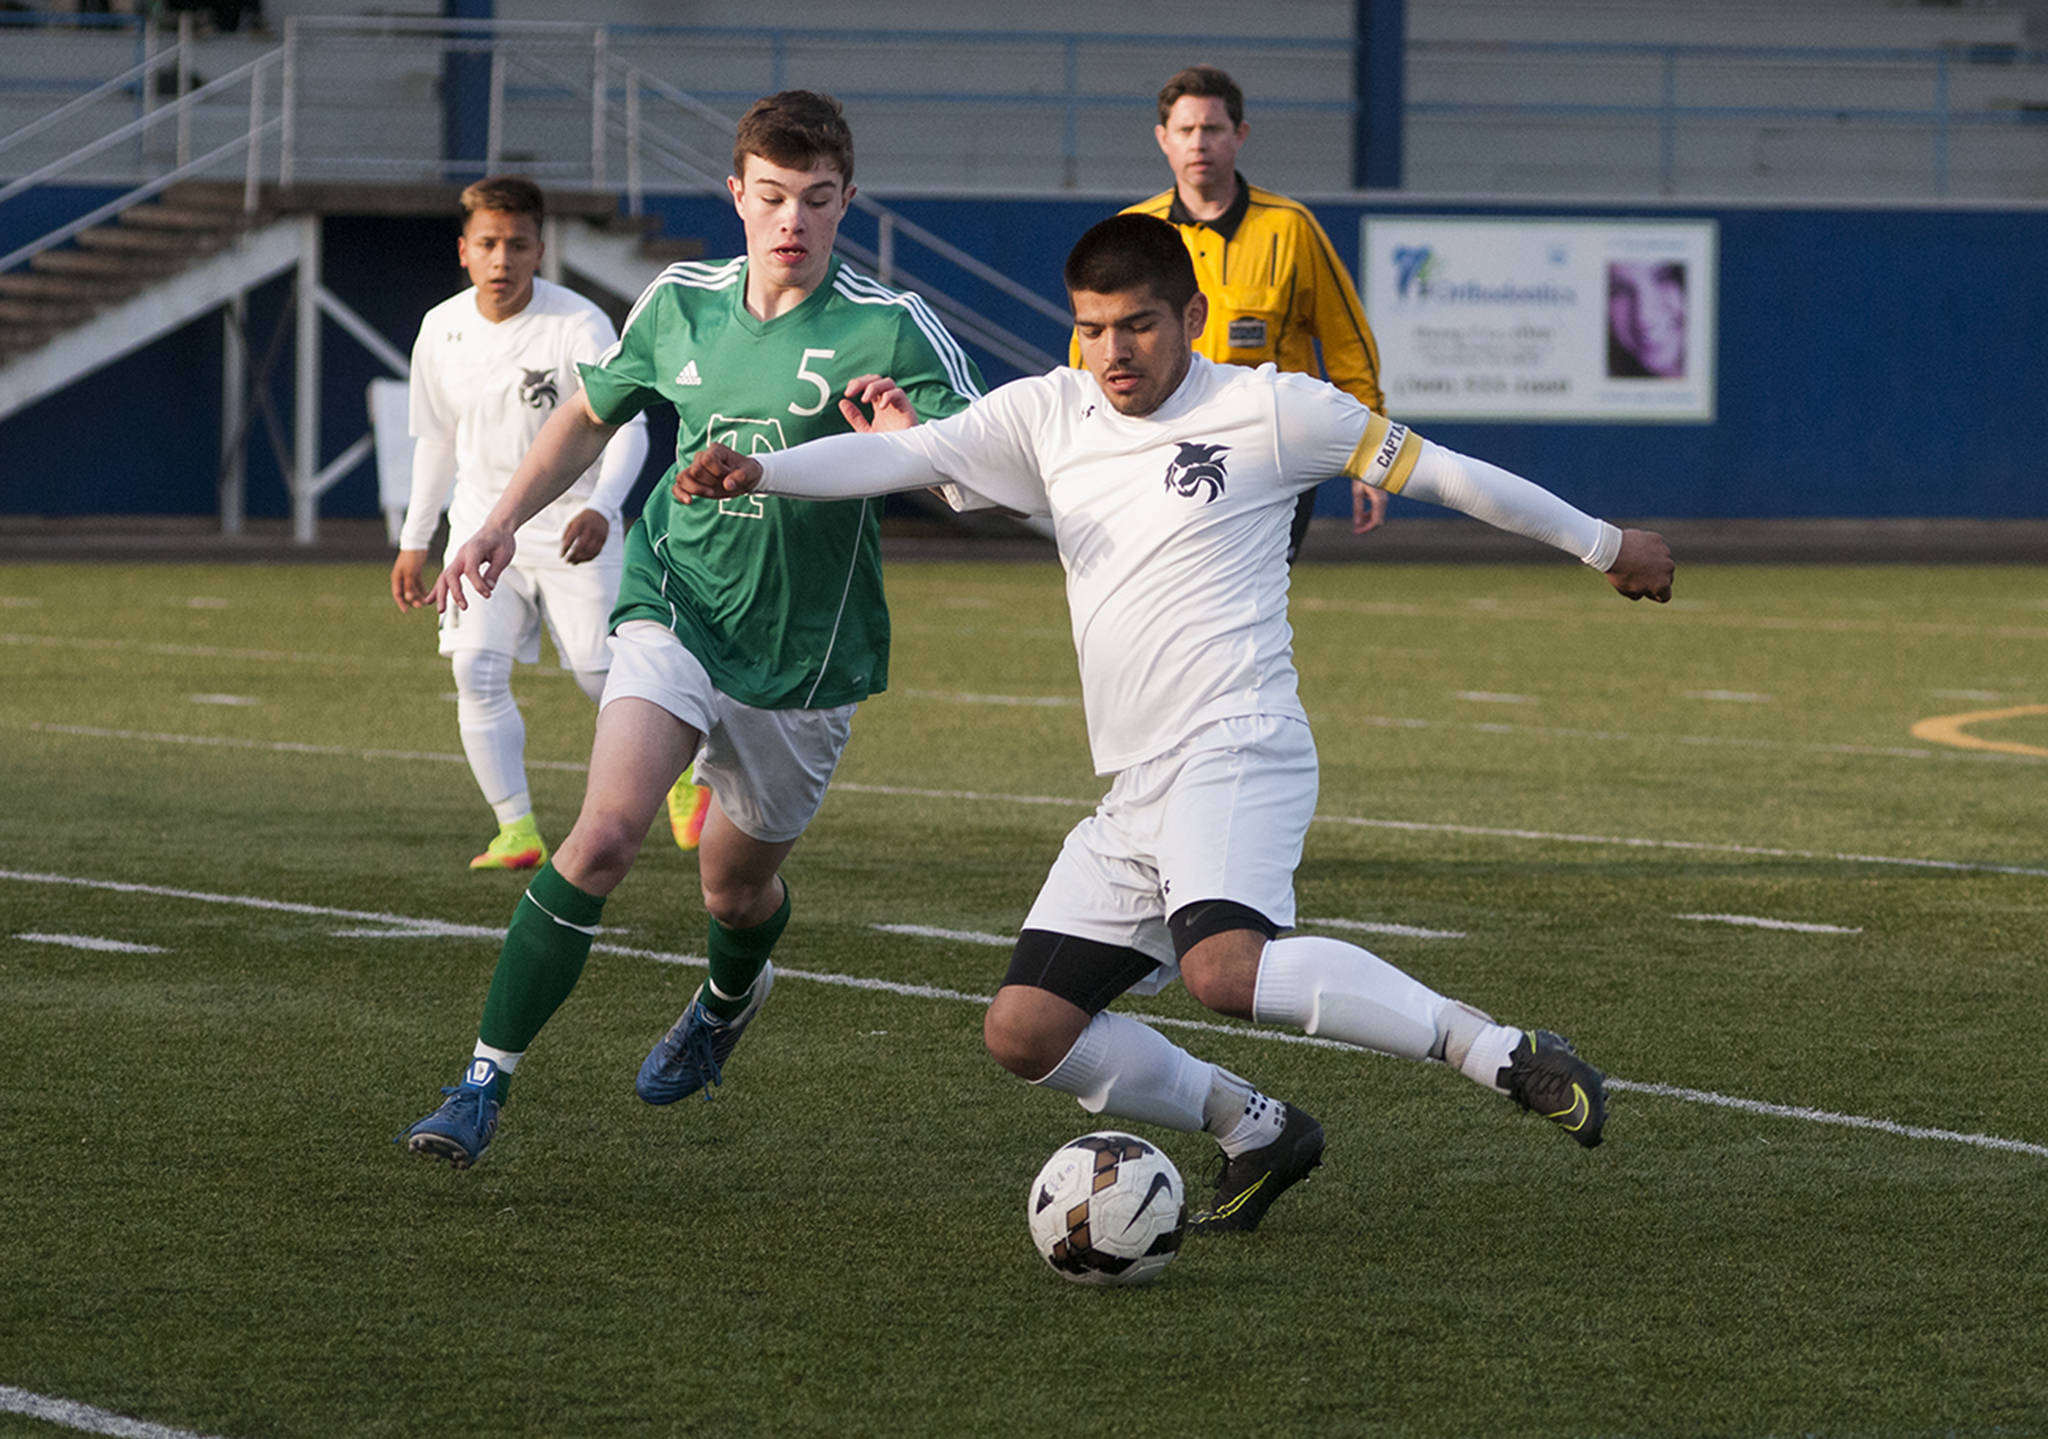 (Brendan Carl | The Daily World, file) Aberdeen’s Cesar Corona, seen here controlling the ball against Tumwater, is one of three Bobcats named to the WSSCA Washington All-State 2A Boys Soccer team, which was released recently. Corona and defenseman Robby Lewis were named to the first team, while Miguel Torres was named to the second team.